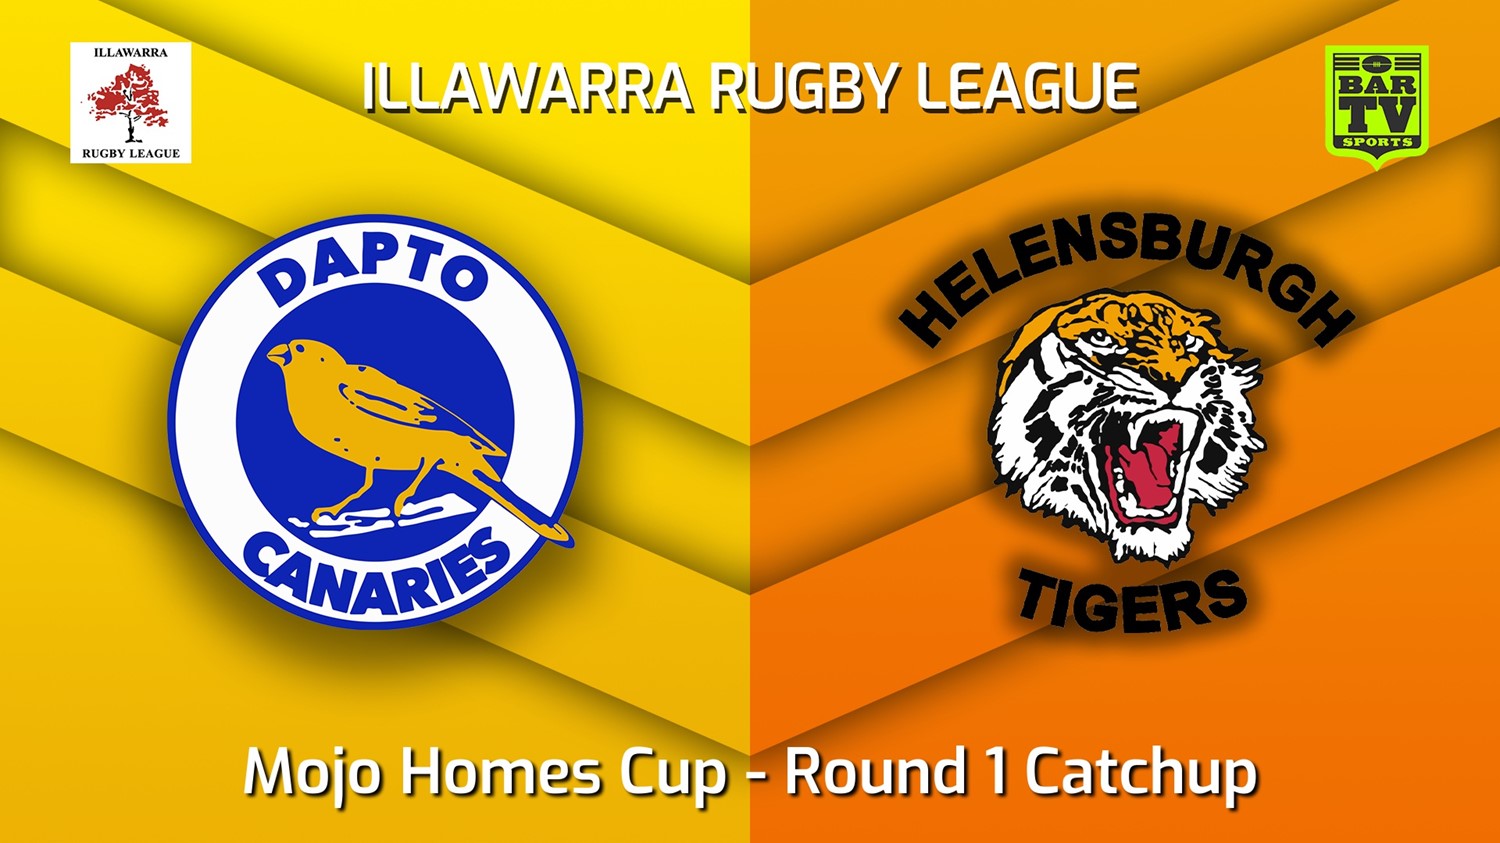 220611-Illawarra Round 1 Catchup - Mojo Homes Cup - Dapto Canaries v Helensburgh Tigers Slate Image